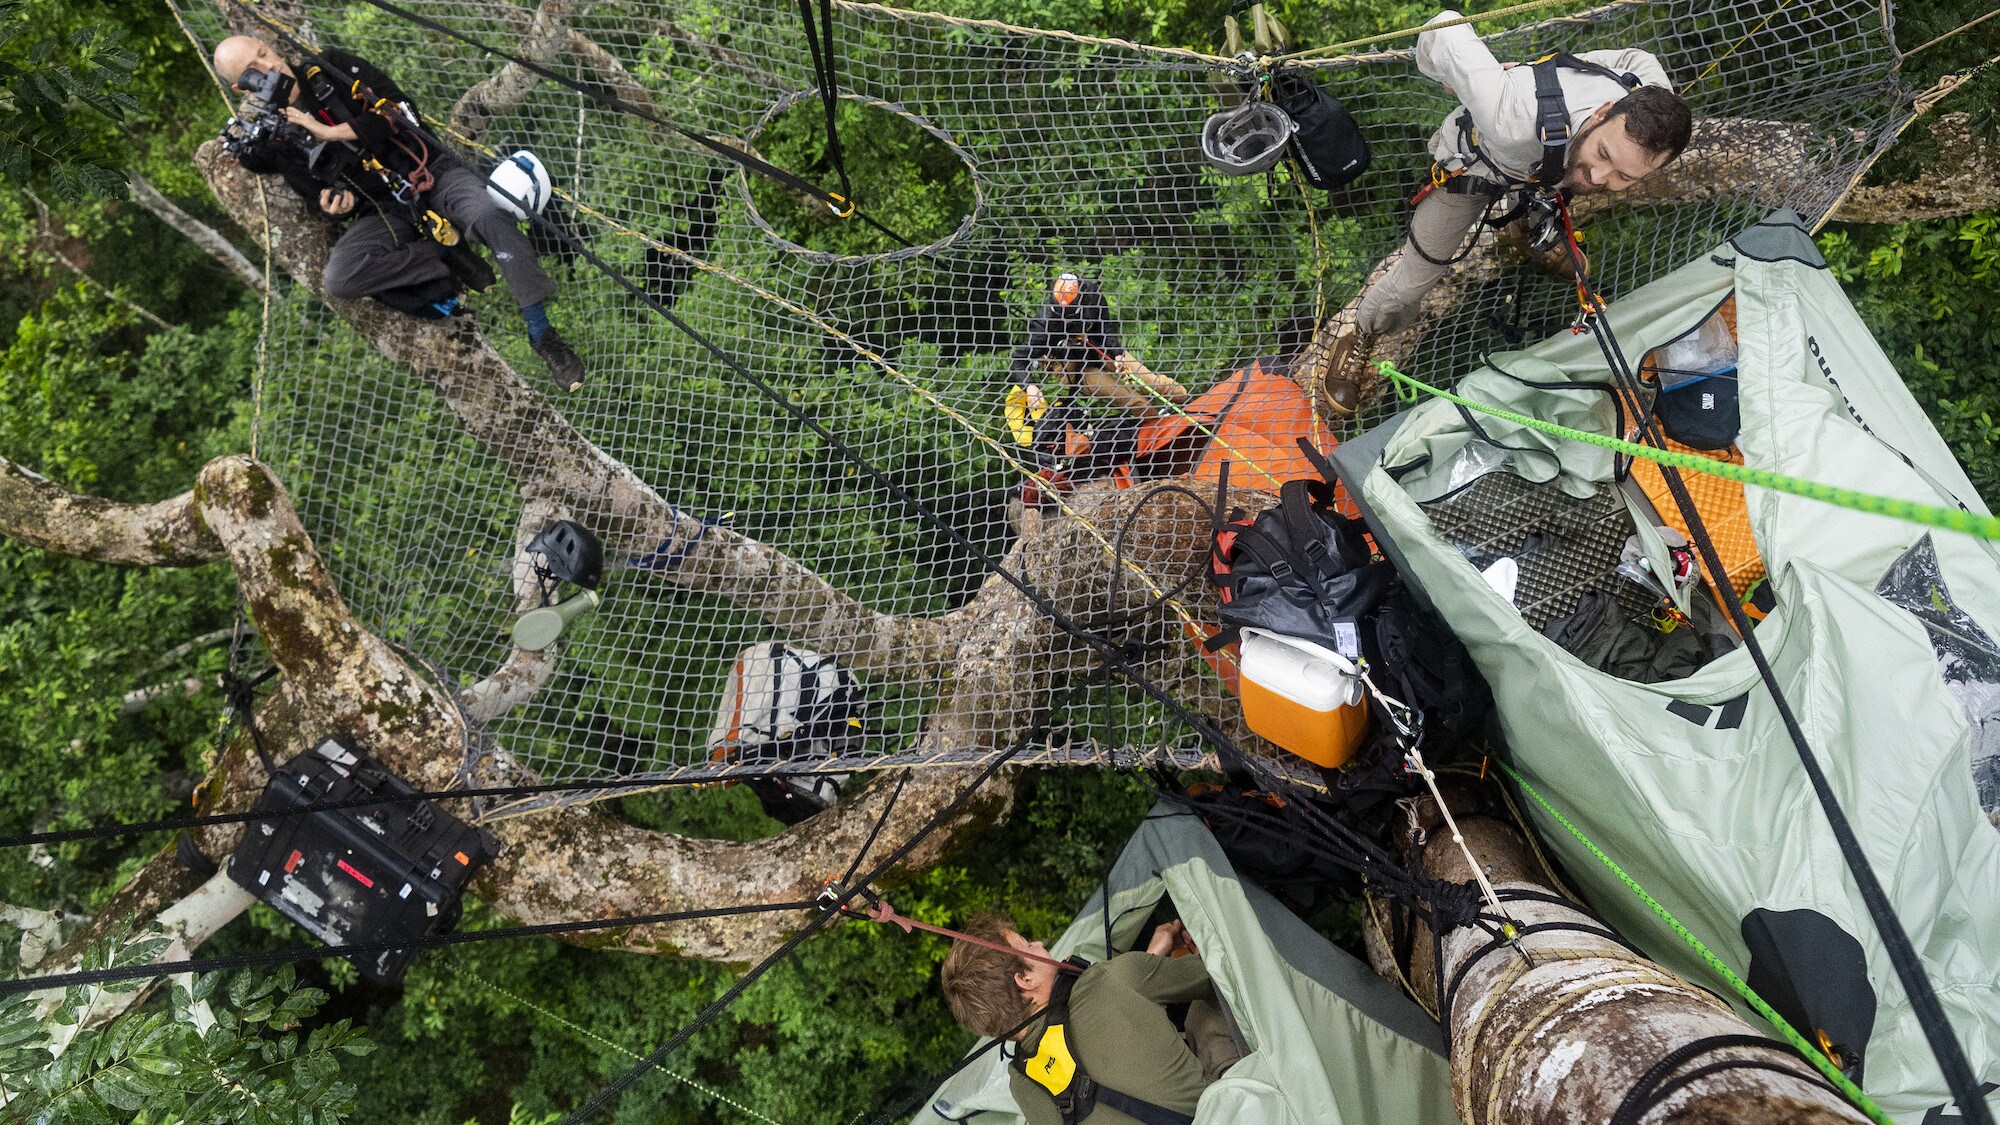 Mark McClean lying on the canopy netting while filming. (National Geographic for Disney+/Waldo Etherington)